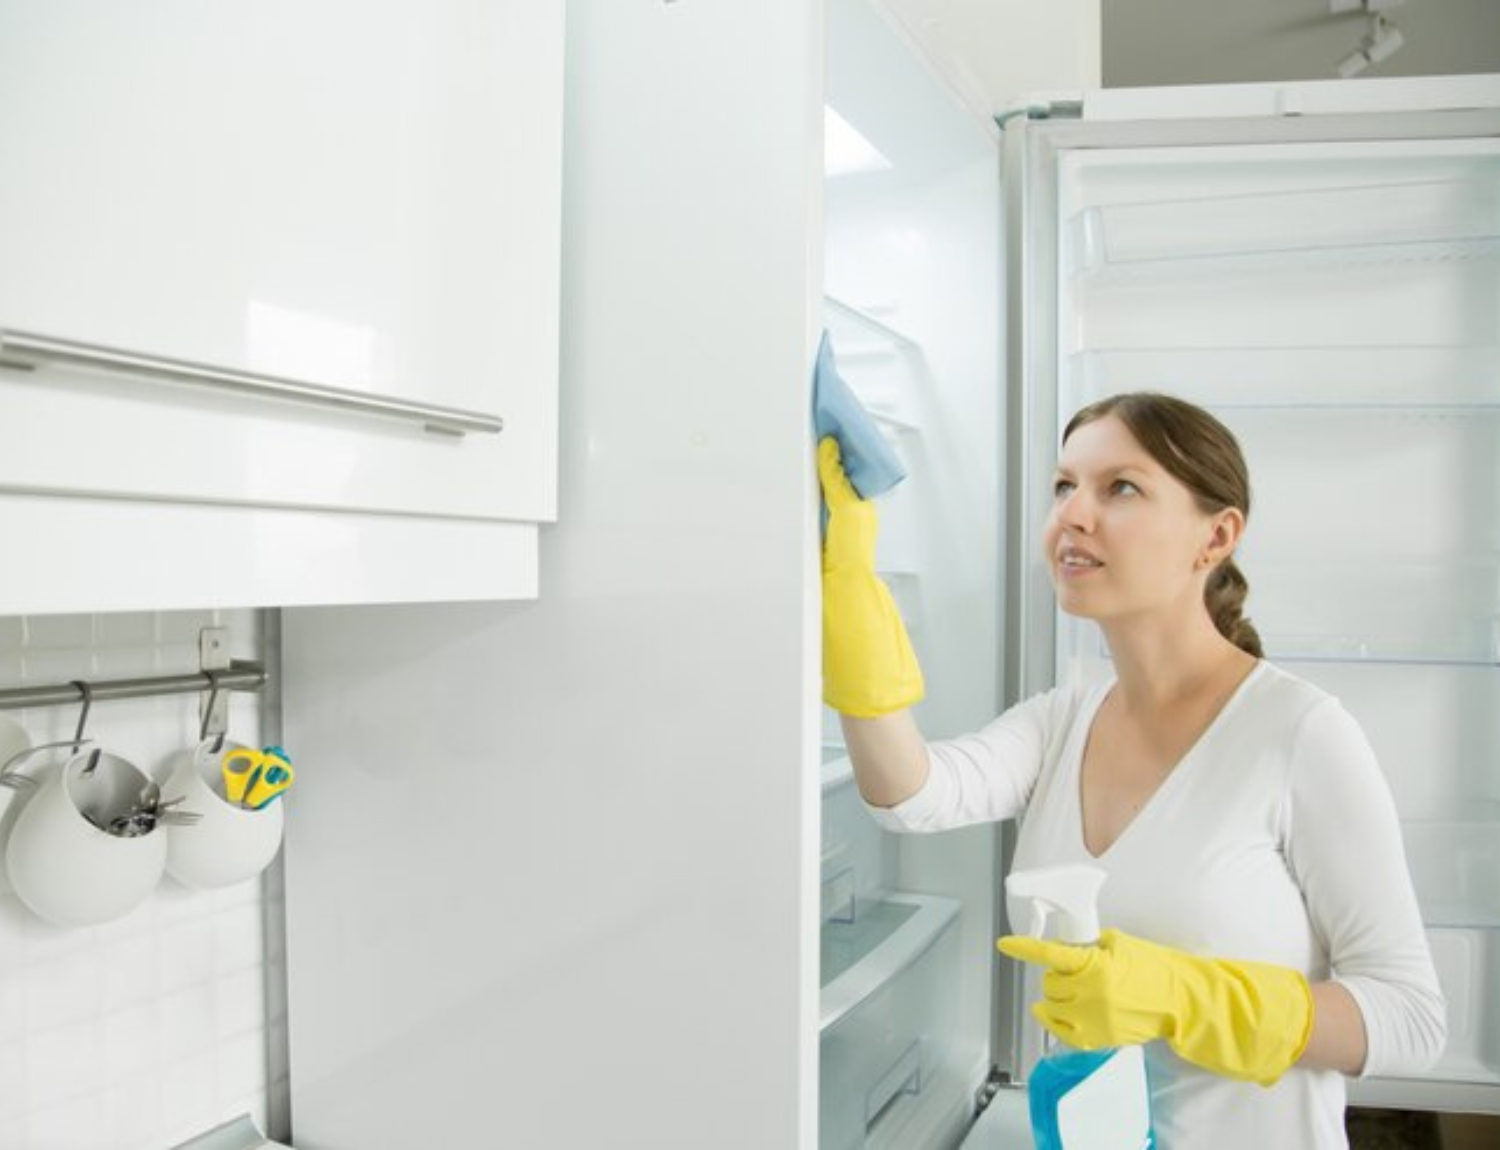 Maintaining a clean refrigerator